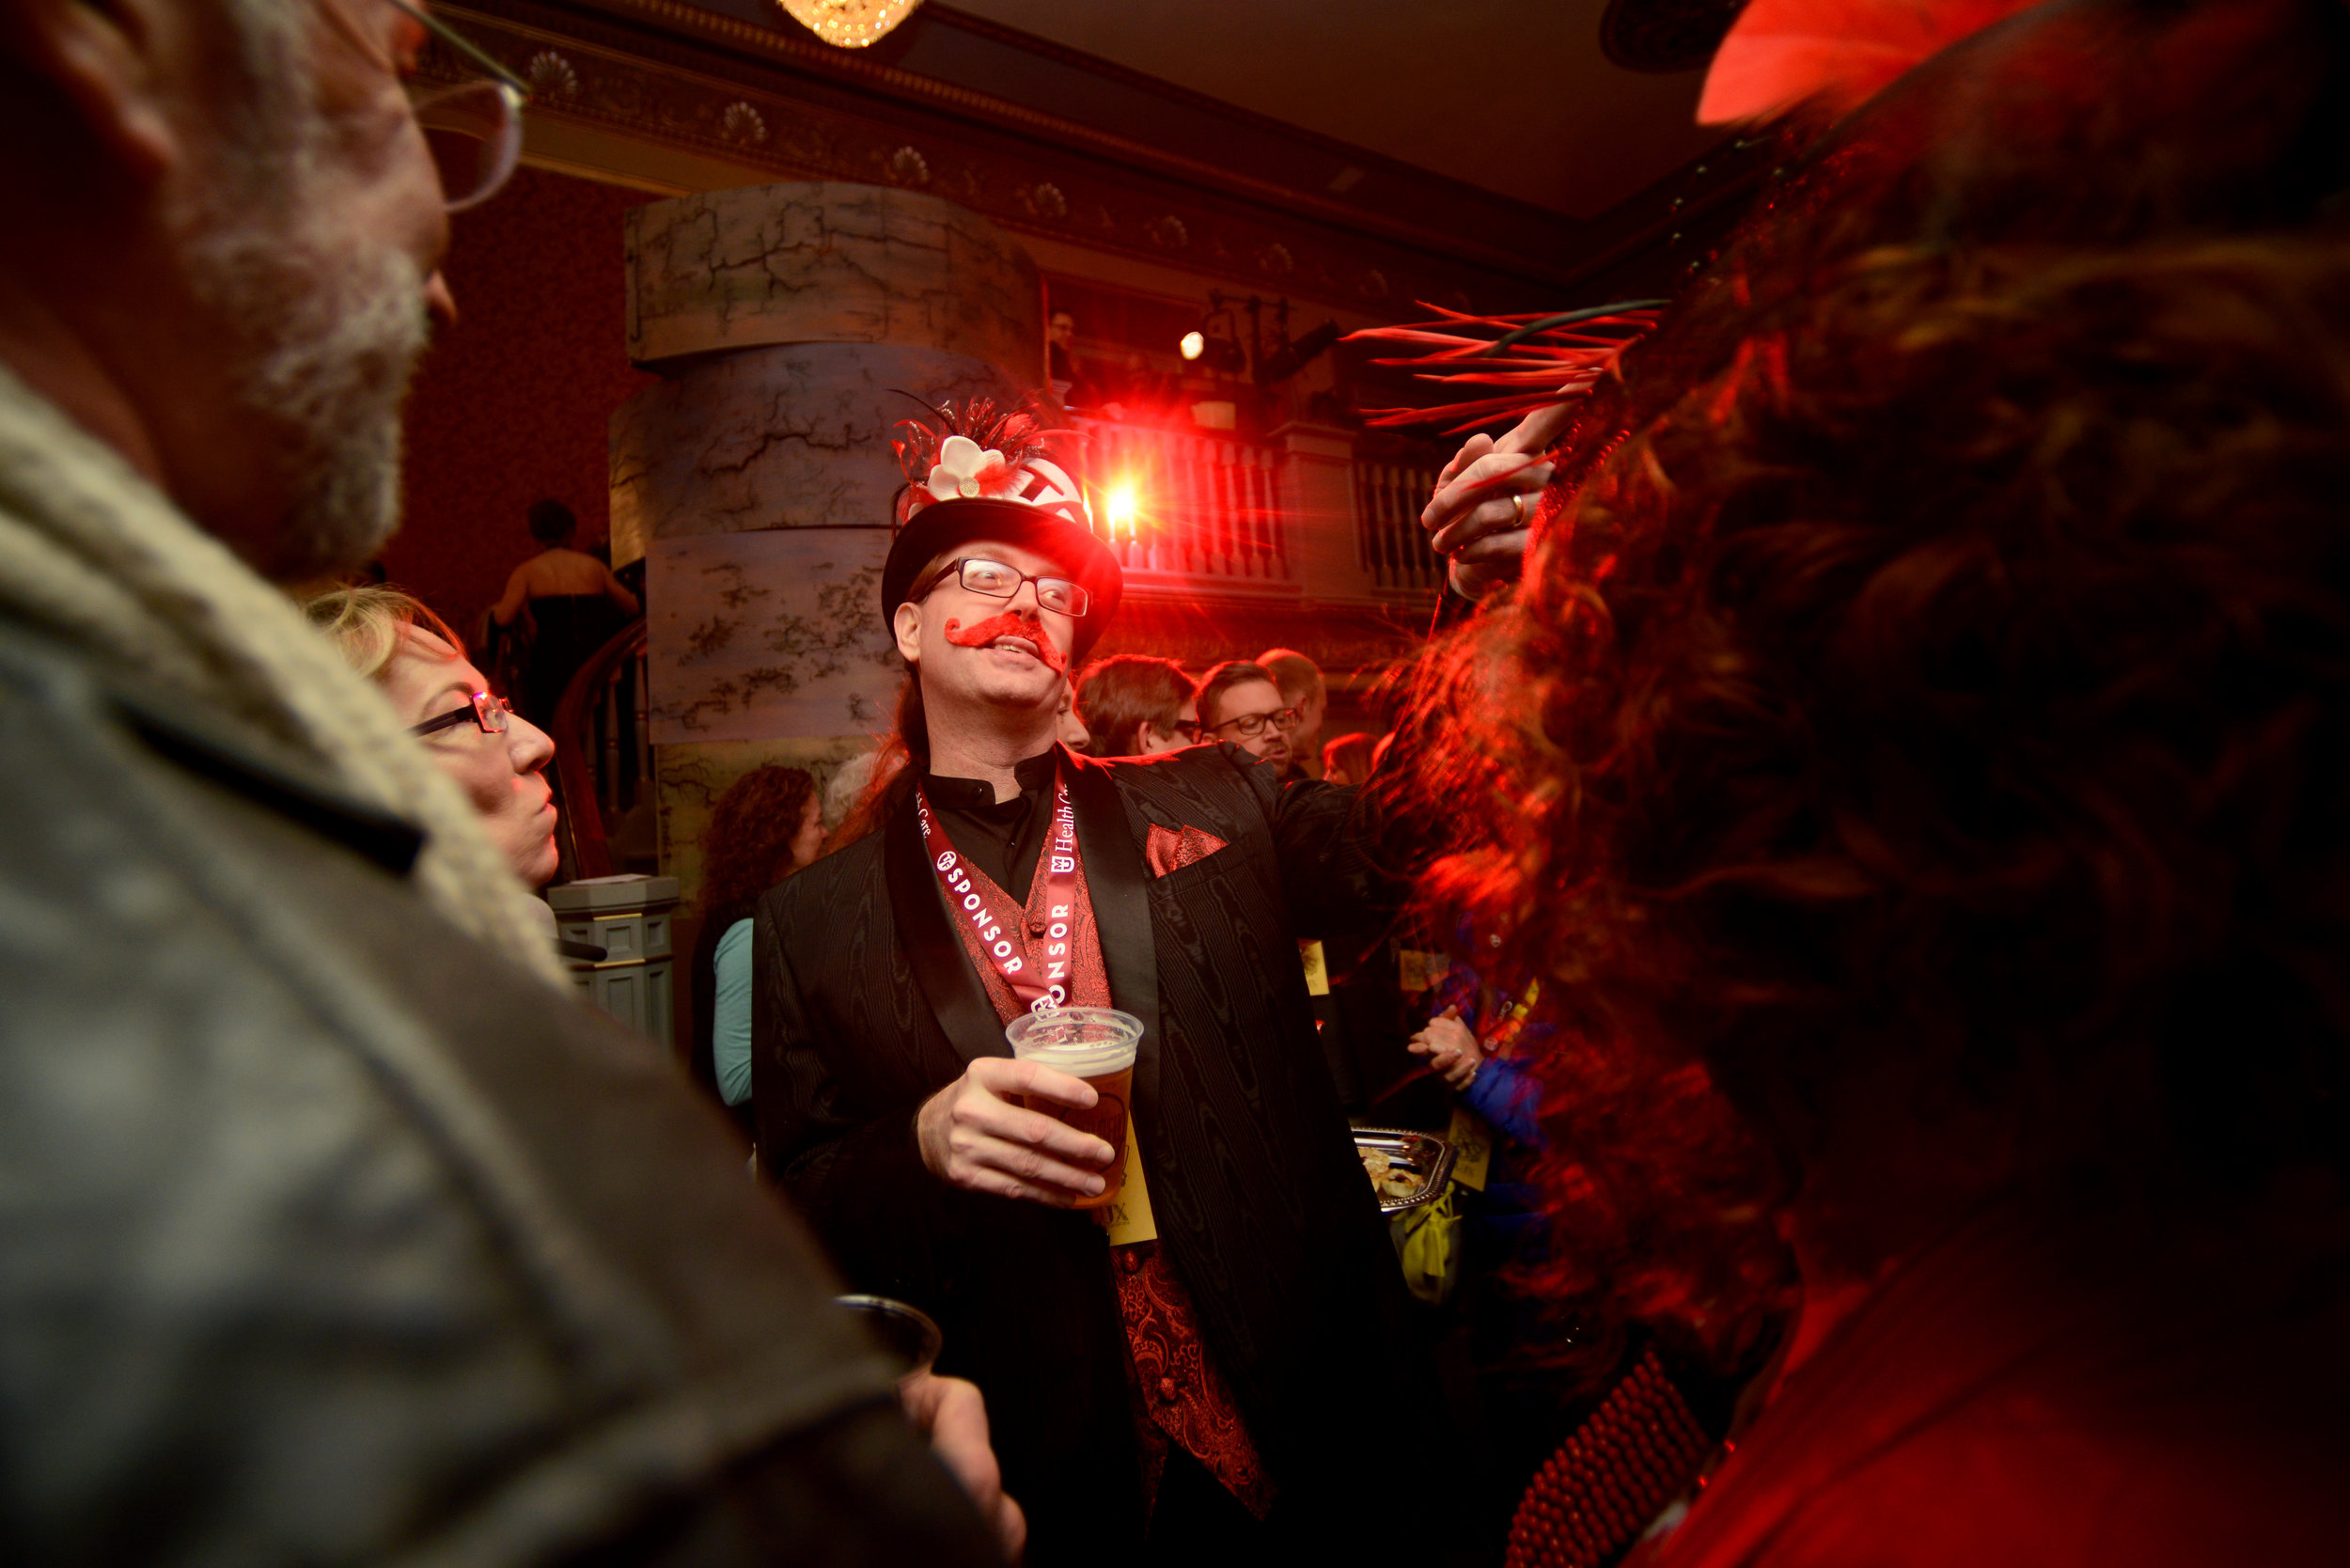  Steve Powell points to a friend during the True/False Jubilee masquerade Thursday, March 3, 2016, at the Missouri Theatre in Columbia, MO. Powell and his wife, Kristi, were sponsors of the festival and had been attending the festival for five years.